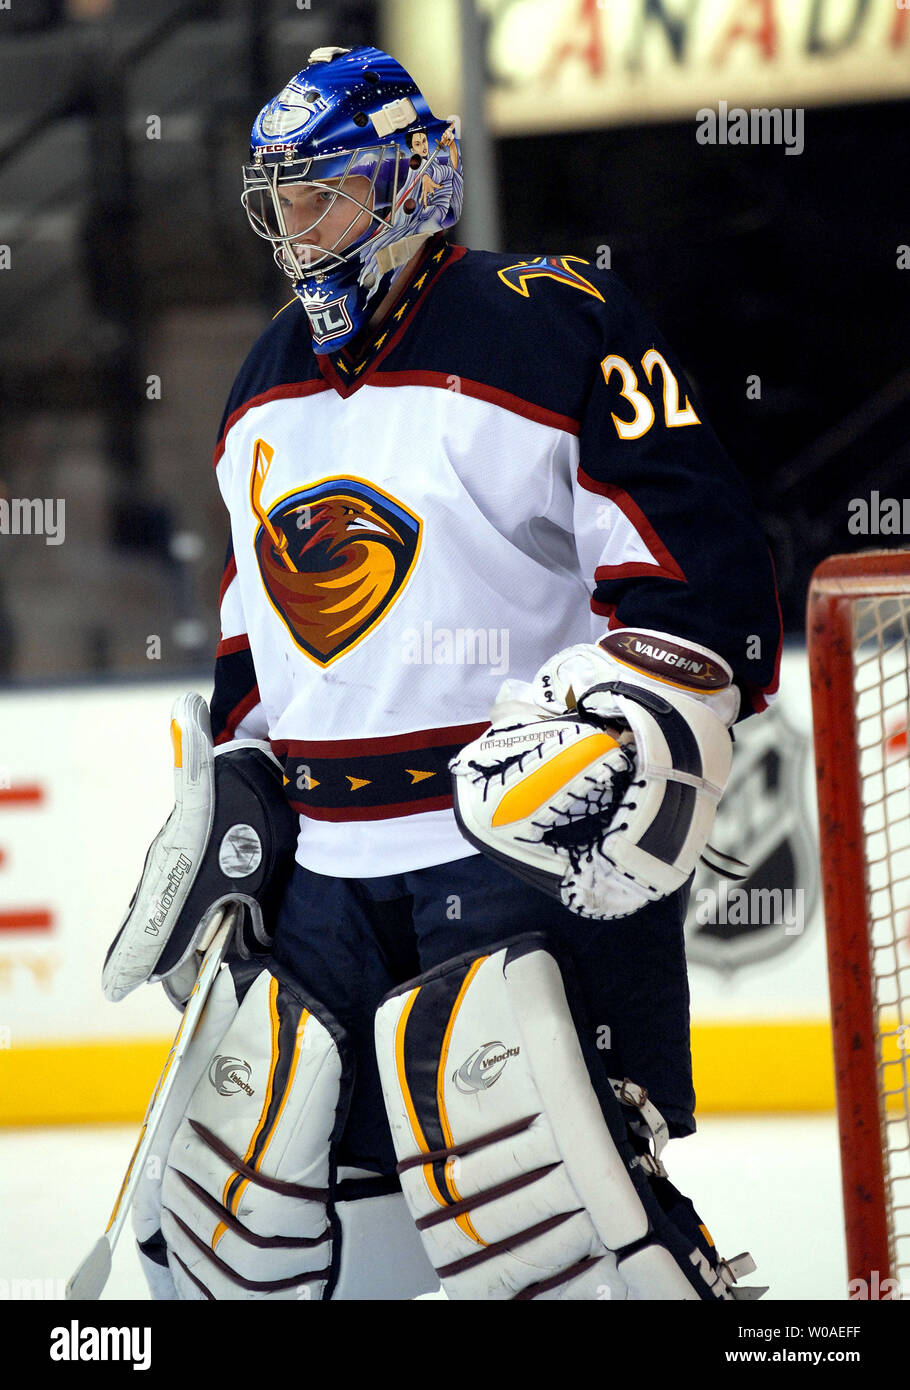 Atlanta Thrashers goalie Kari Lehtonen of Finland takes his position in  front of the net during the pre-game warmups as the Toronto Maple Leafs  host the Thrashers at the Air Canada Center